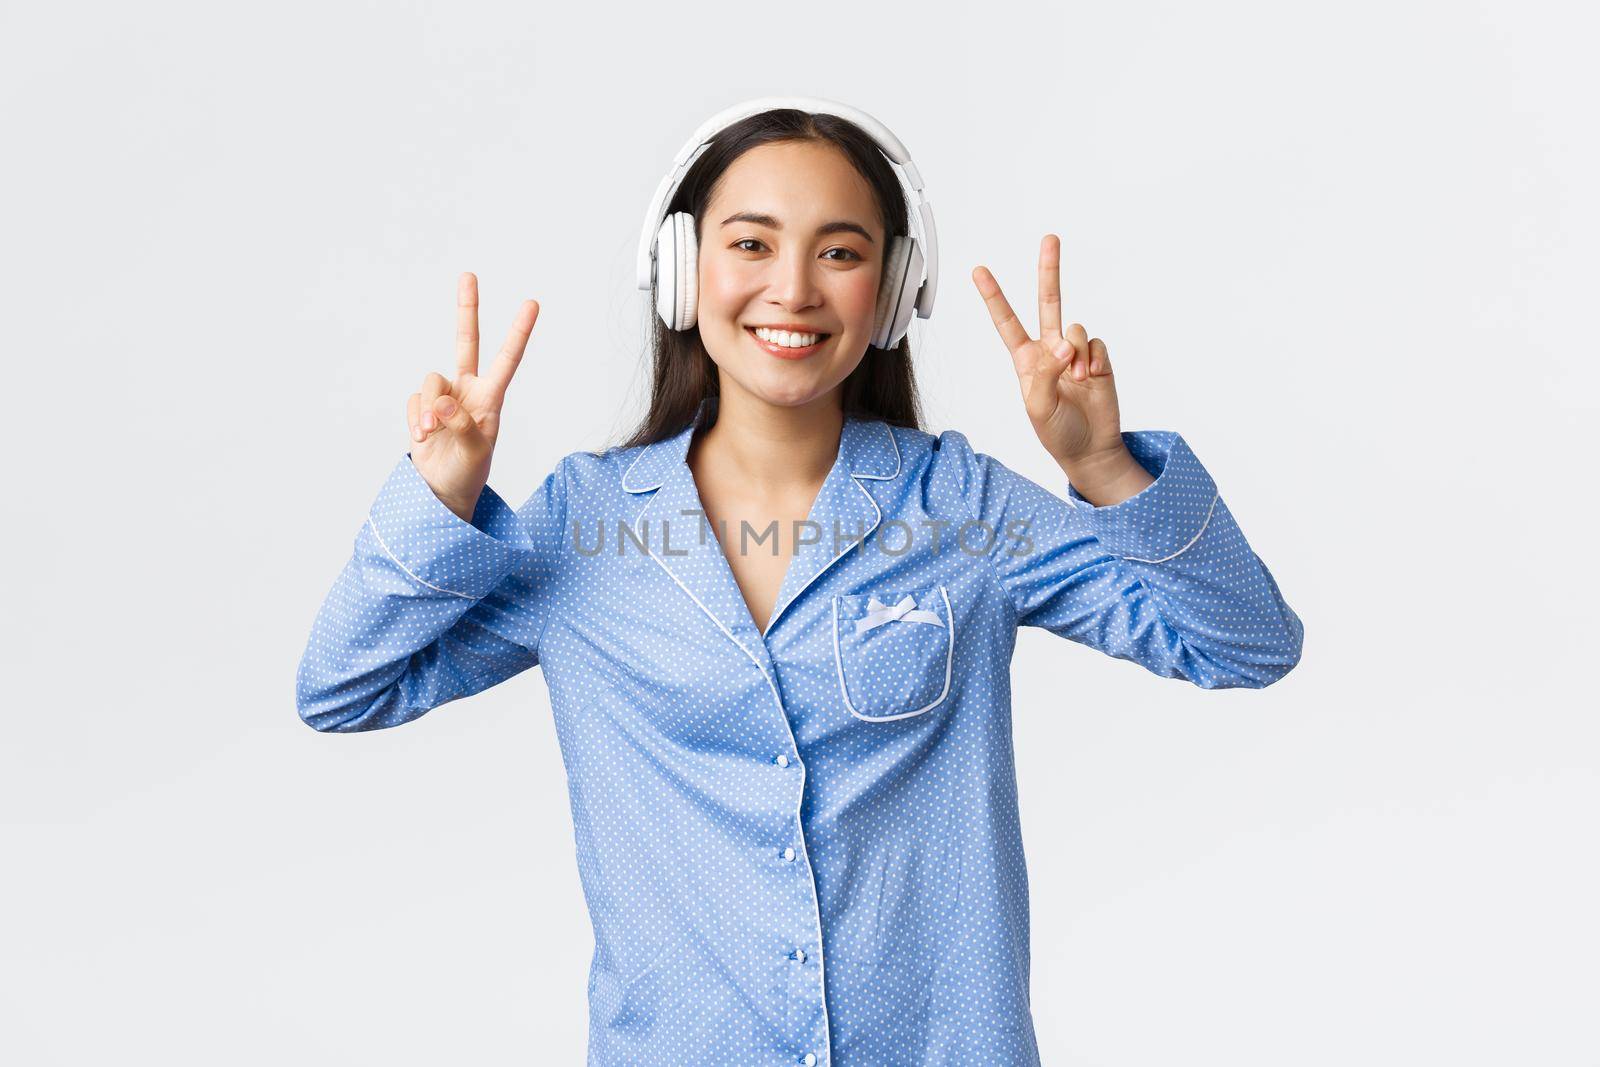 Home leisure, weekends and lifestyle concept. Kawaii asian girl in pajamas listening music in wireless headphones and showing peace gesture with broad happy smile, white background.